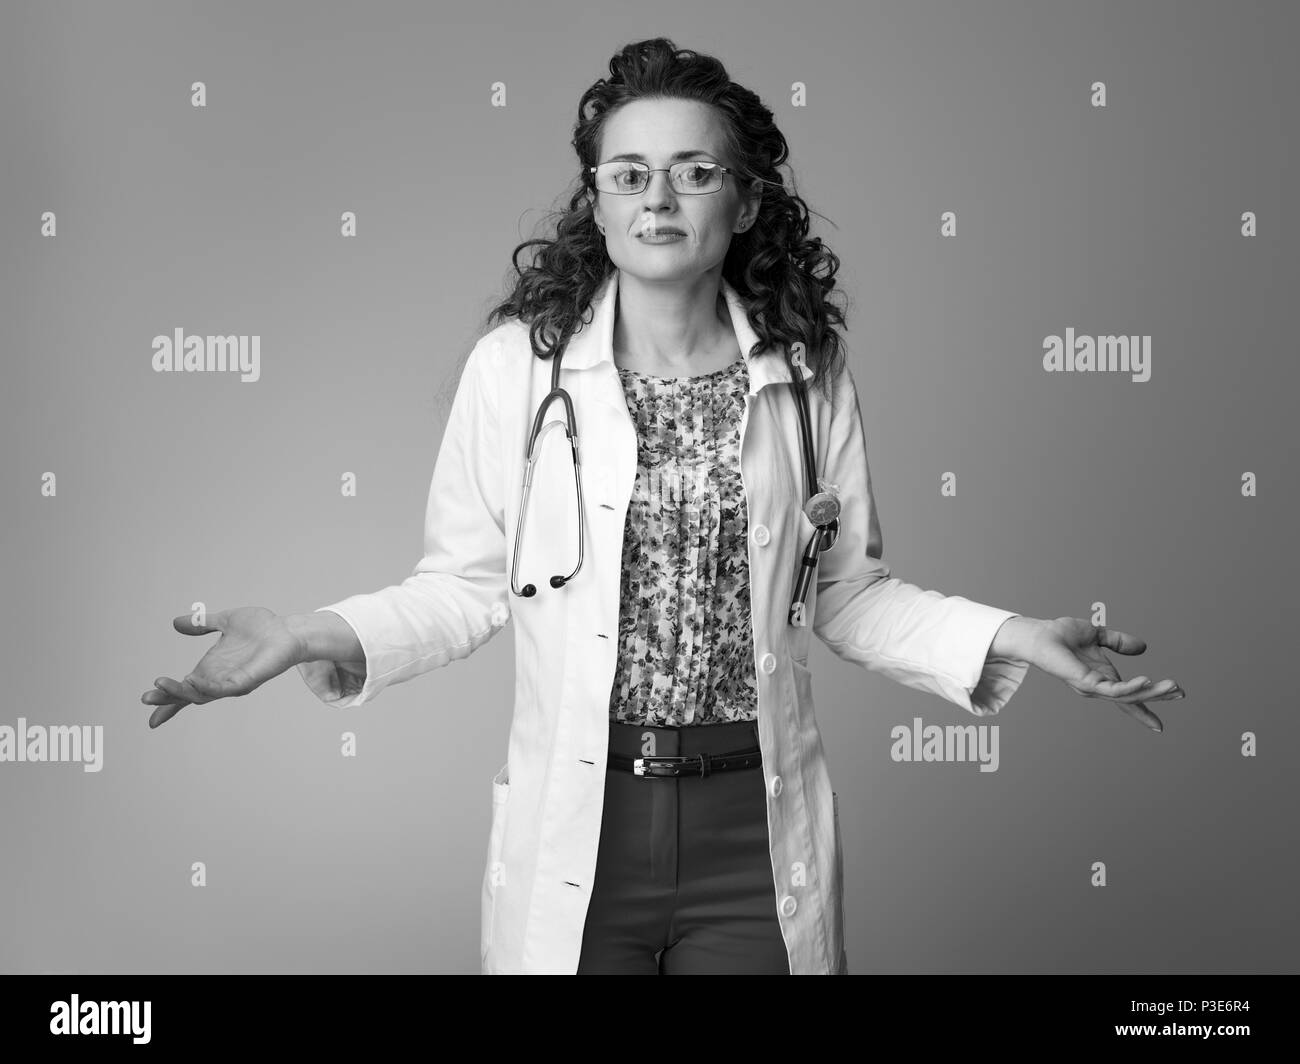 paediatrist doctor in white medical robe shrugging shoulders on background Stock Photo